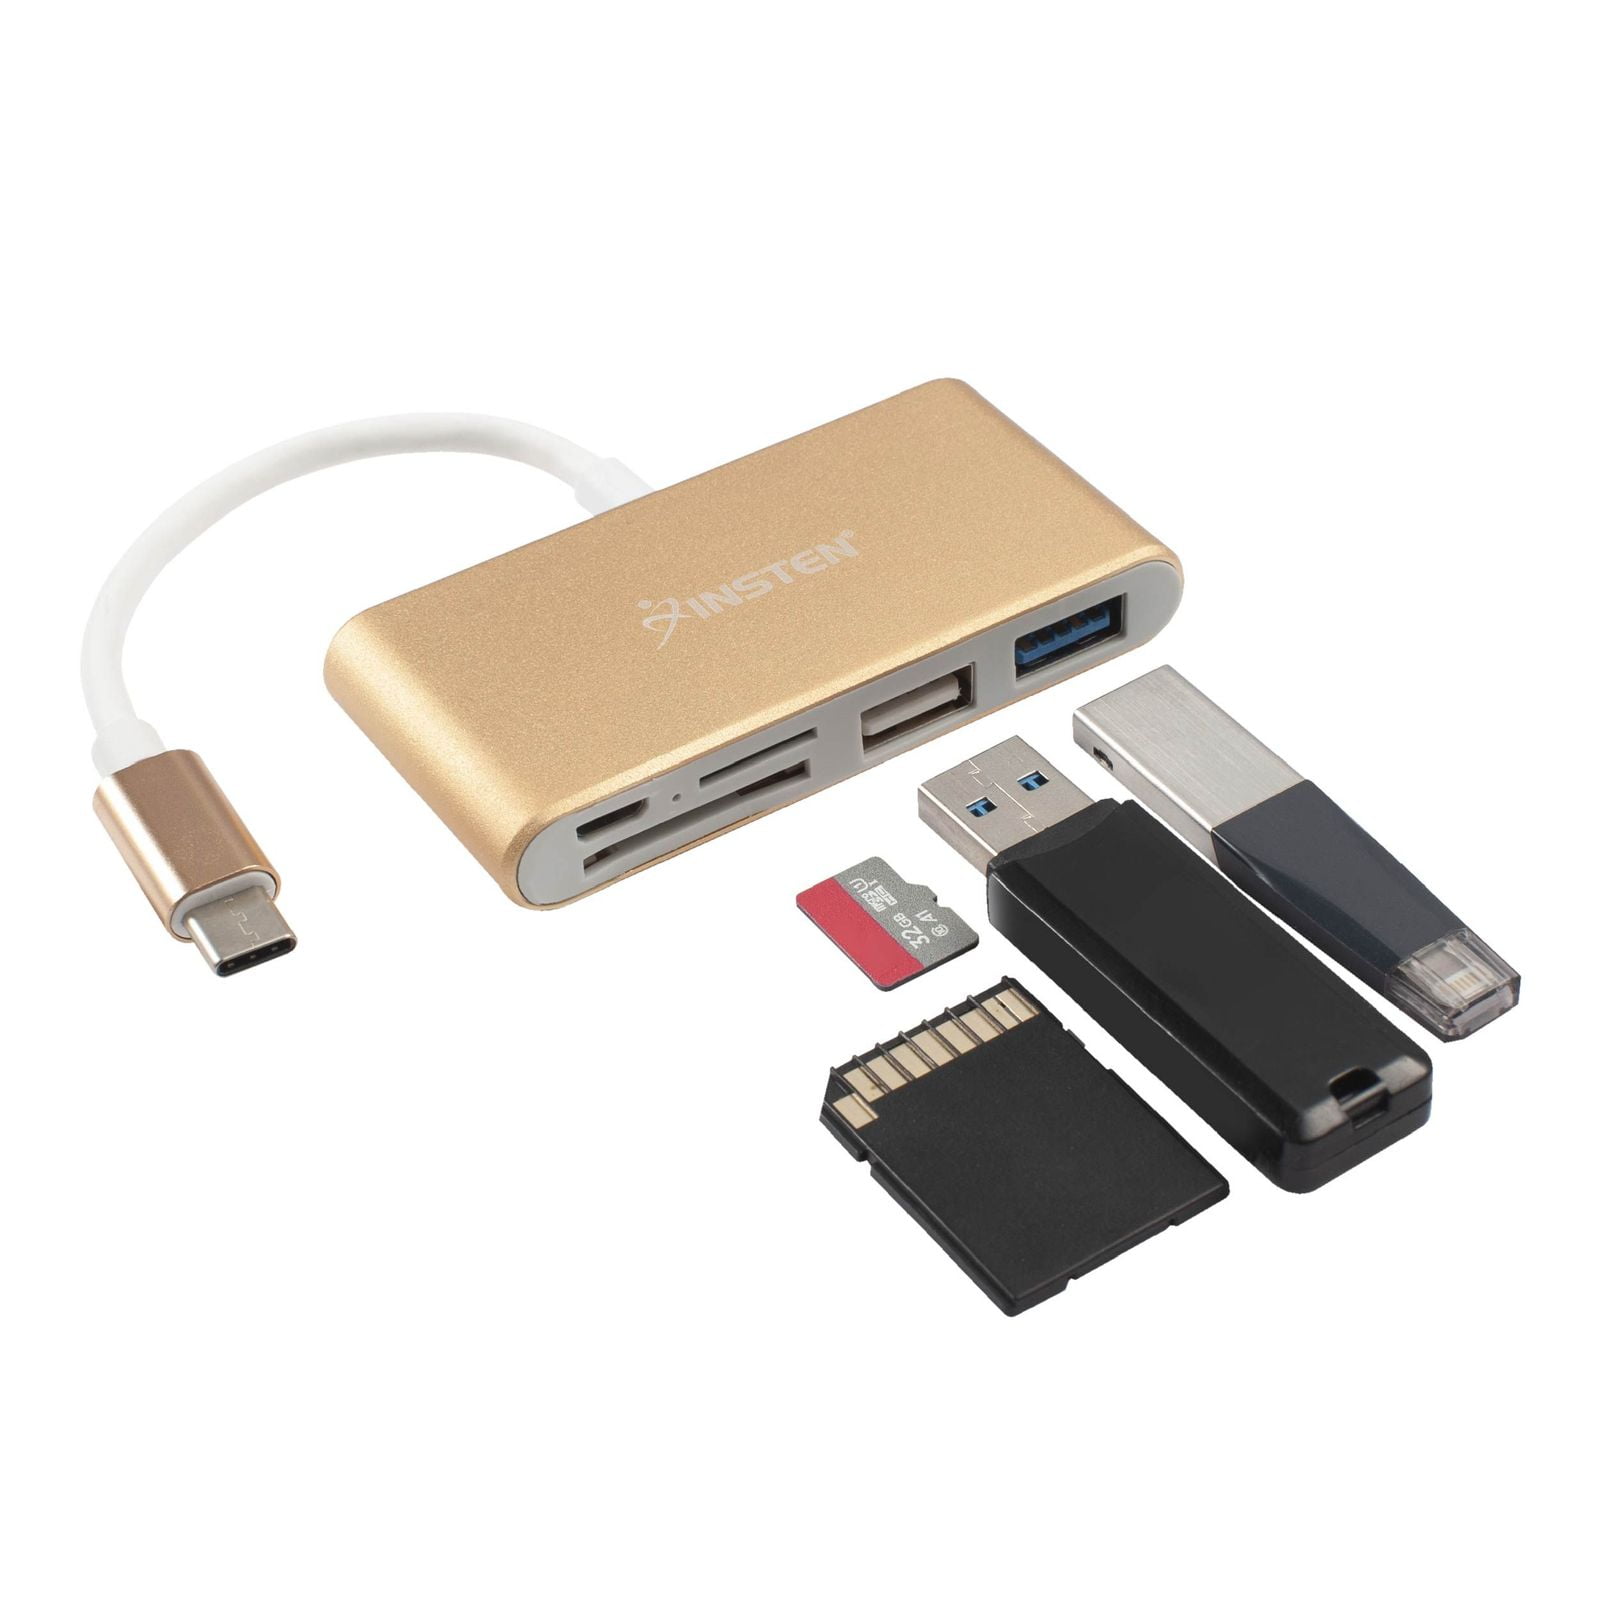 USB Type C 3.0 Memory Card Reader, Portable Card Adapter with USB Hub, For Iphone, PC, MAC, Ipad and Computer, Gold - Walmart.com